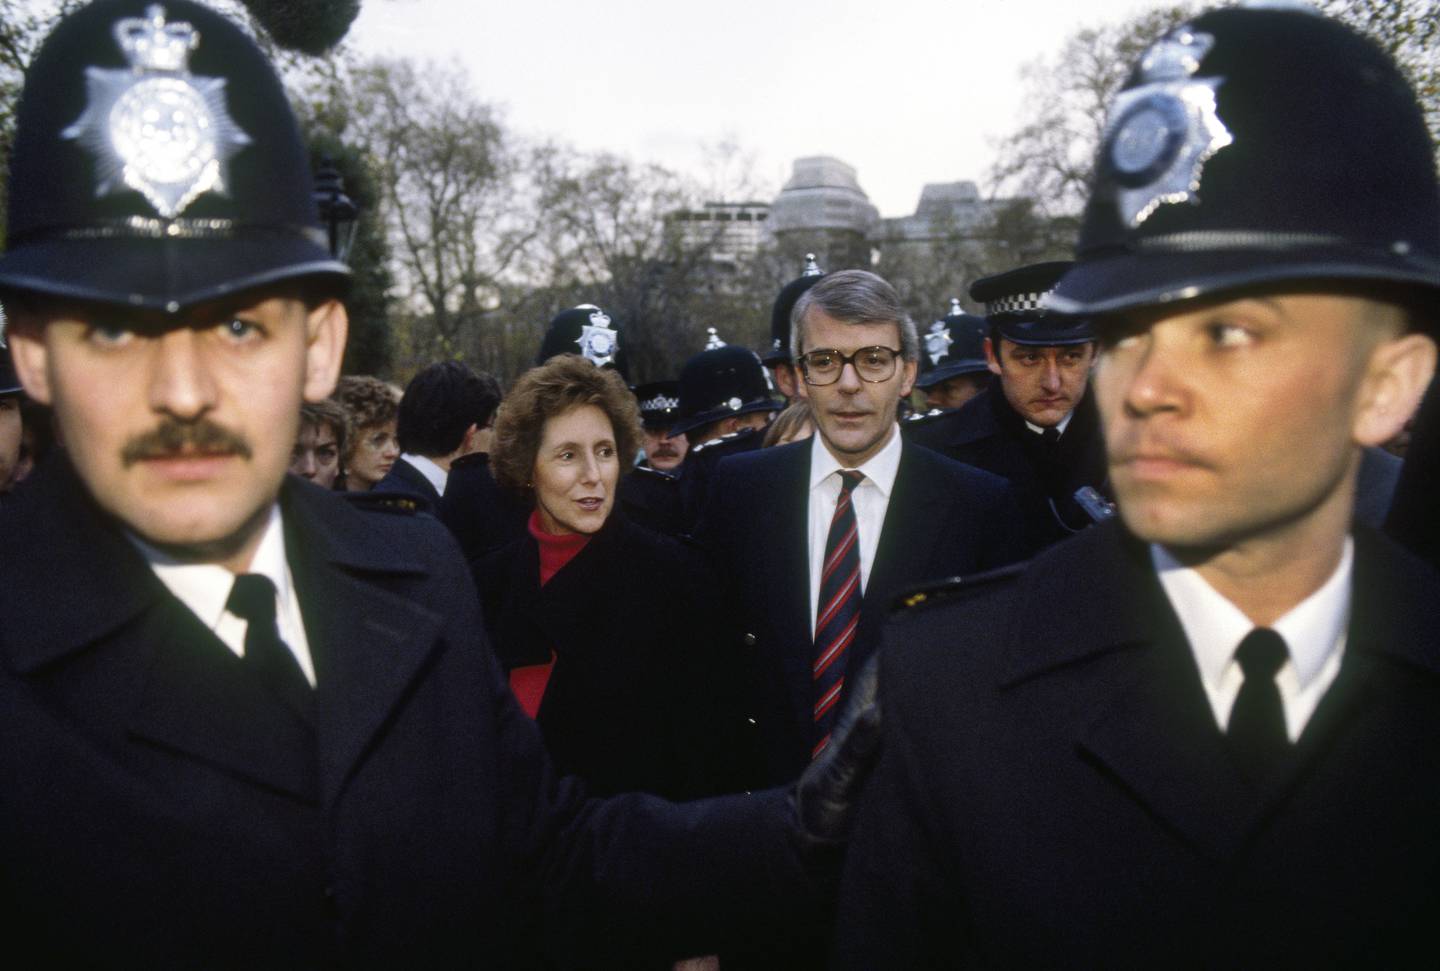 John Major and his wife Norma stroll through St James Park surrounded by Metropolitan police officers during the November 1990 election campaign when he was elected British prime minister. Getty Images